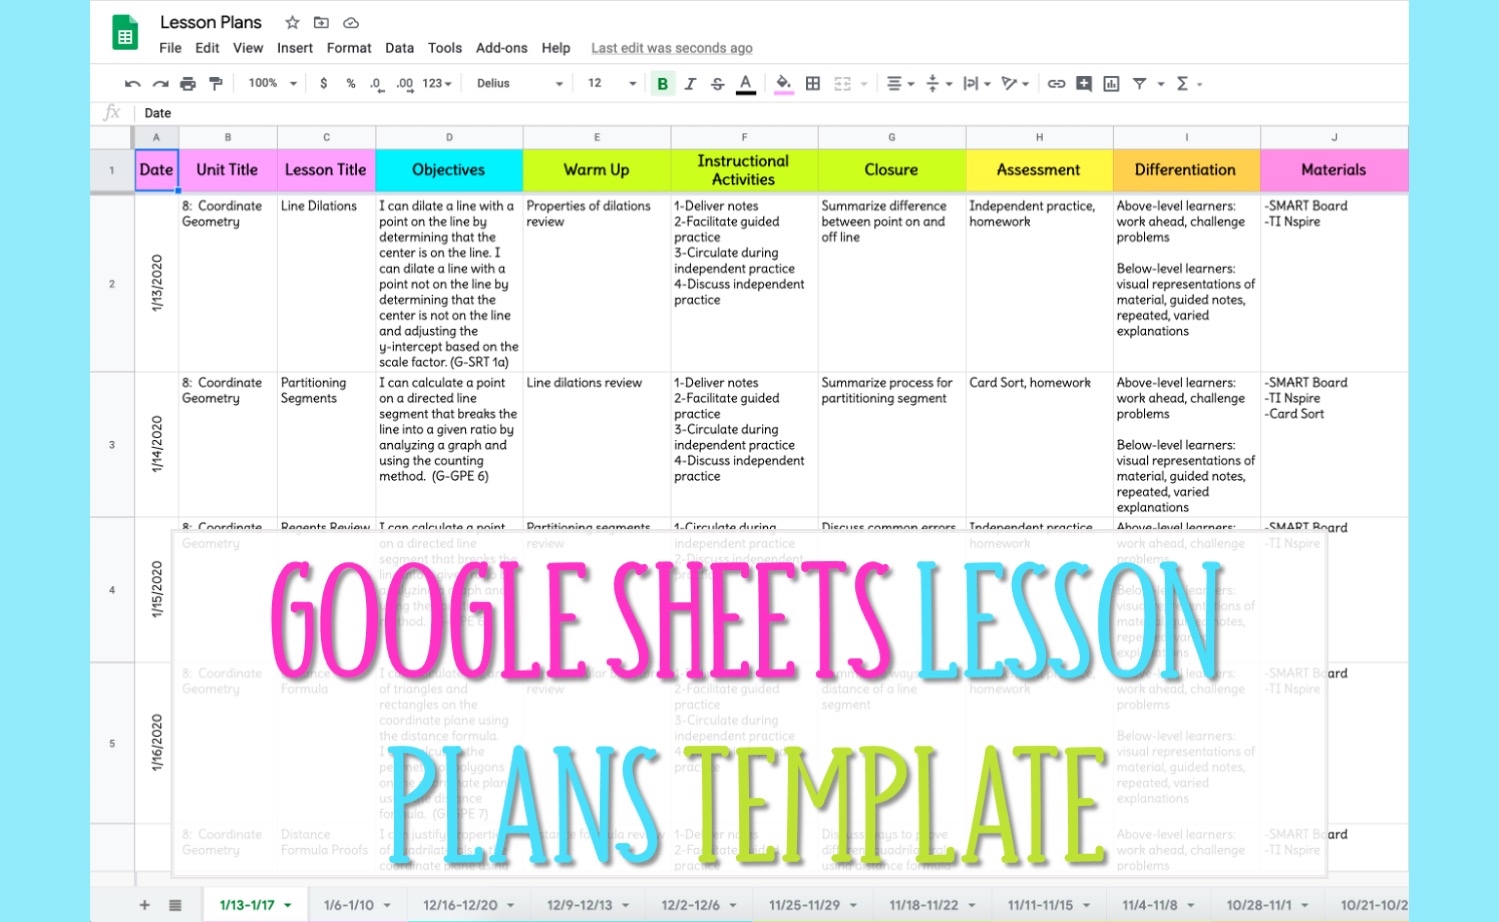 google-sheets-lesson-plan-template-busy-miss-beebe